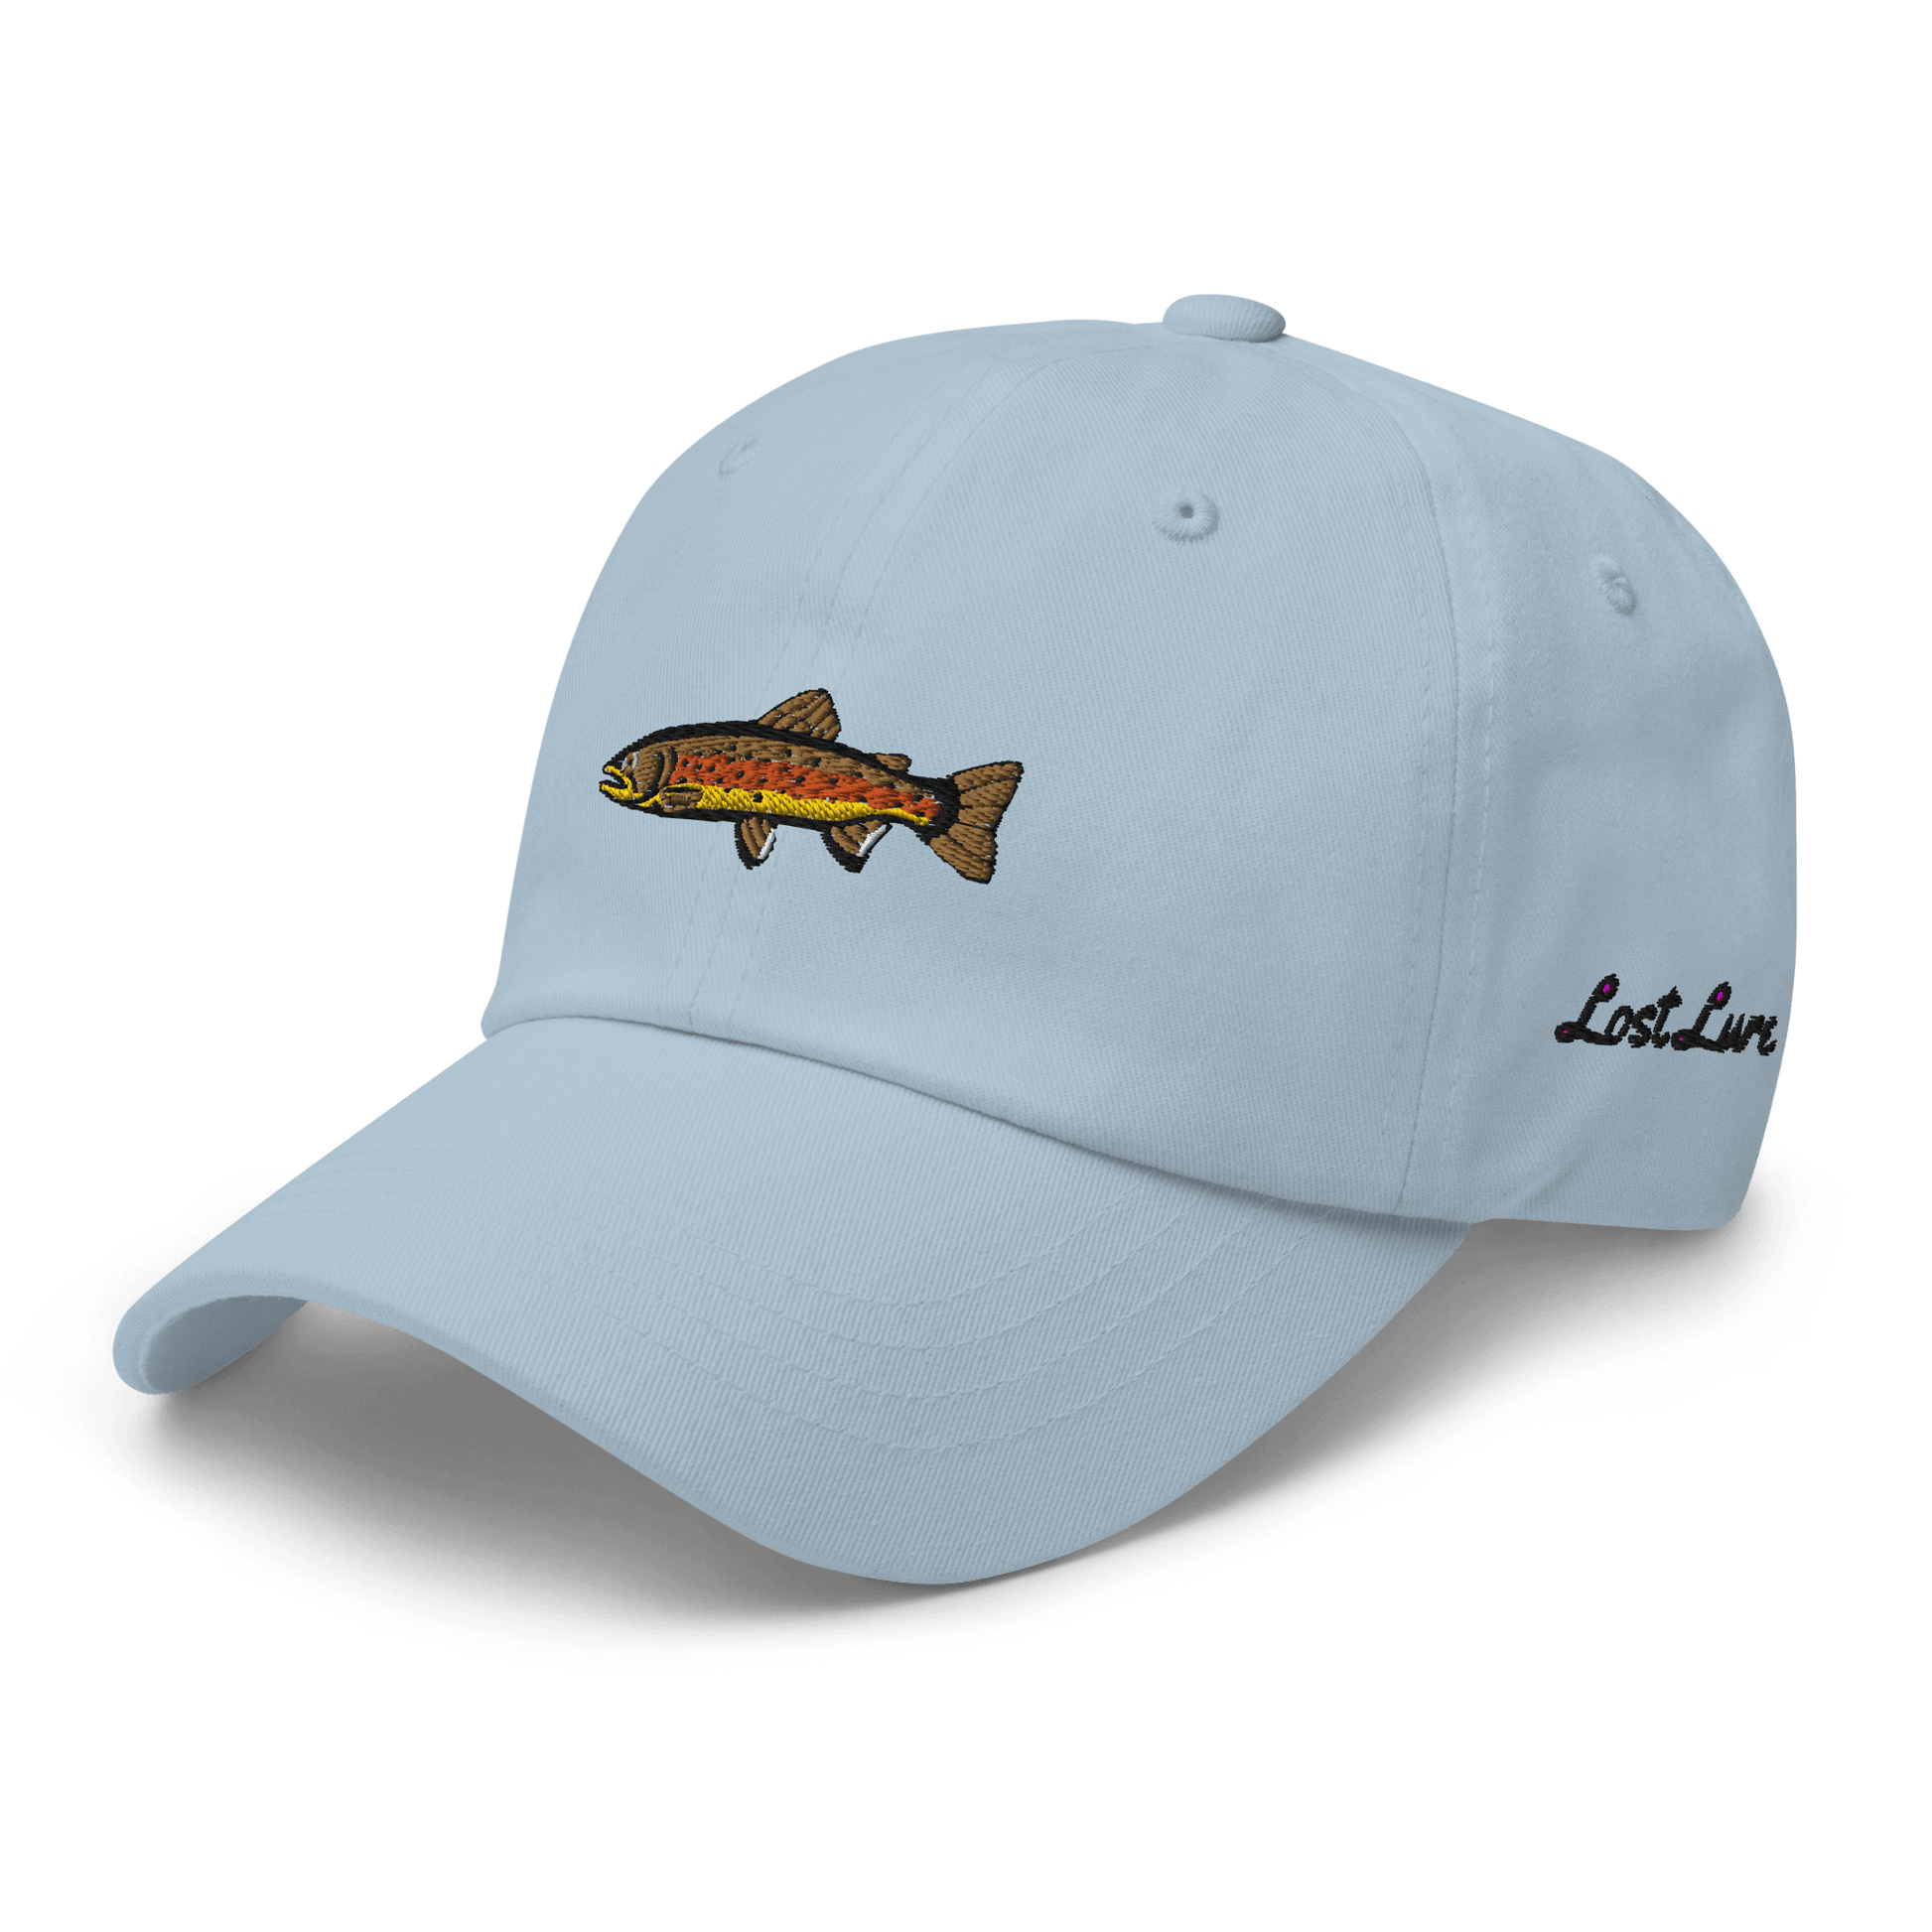 Brown Trout fishing hat. It’s a simple embroidered hat/ dad hat with a brown trout and the lost lure logo on the side. Light blue, front left side